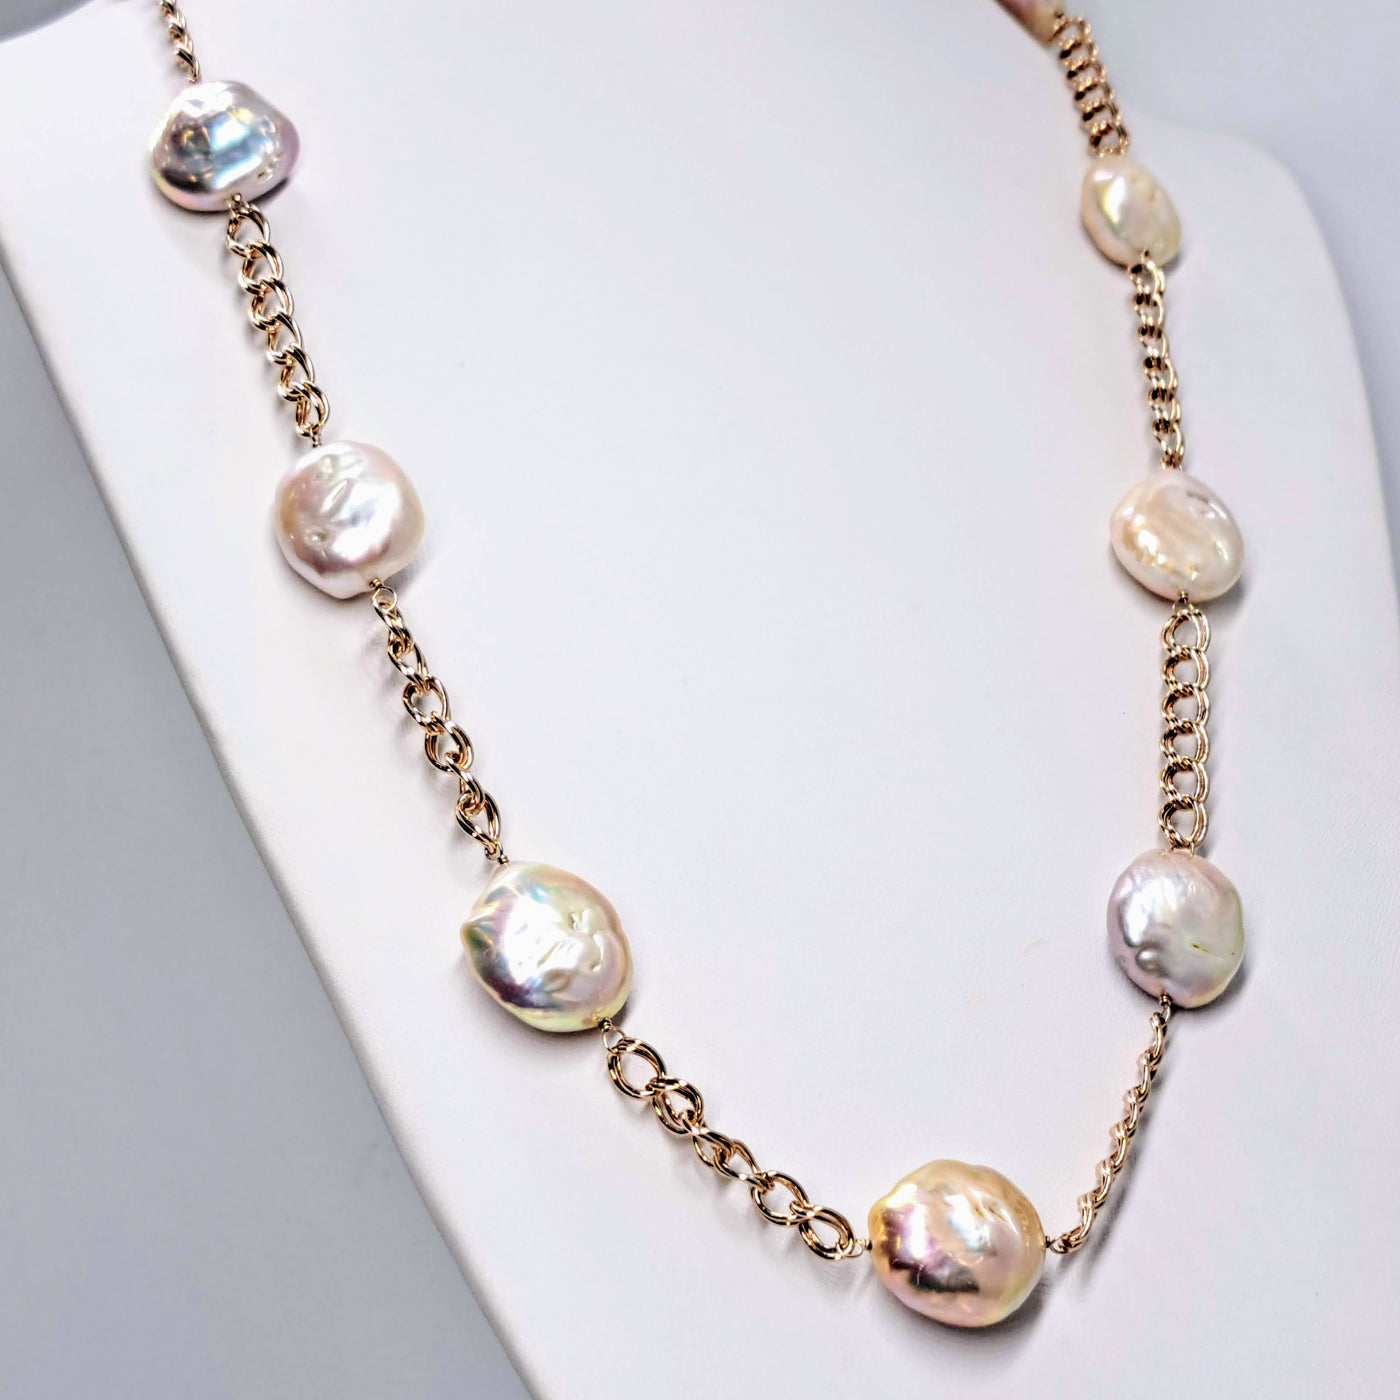 "Rock-N-Roll Cream Puff" 26"-28" Necklace - Pearls, Rose Gold Sterling